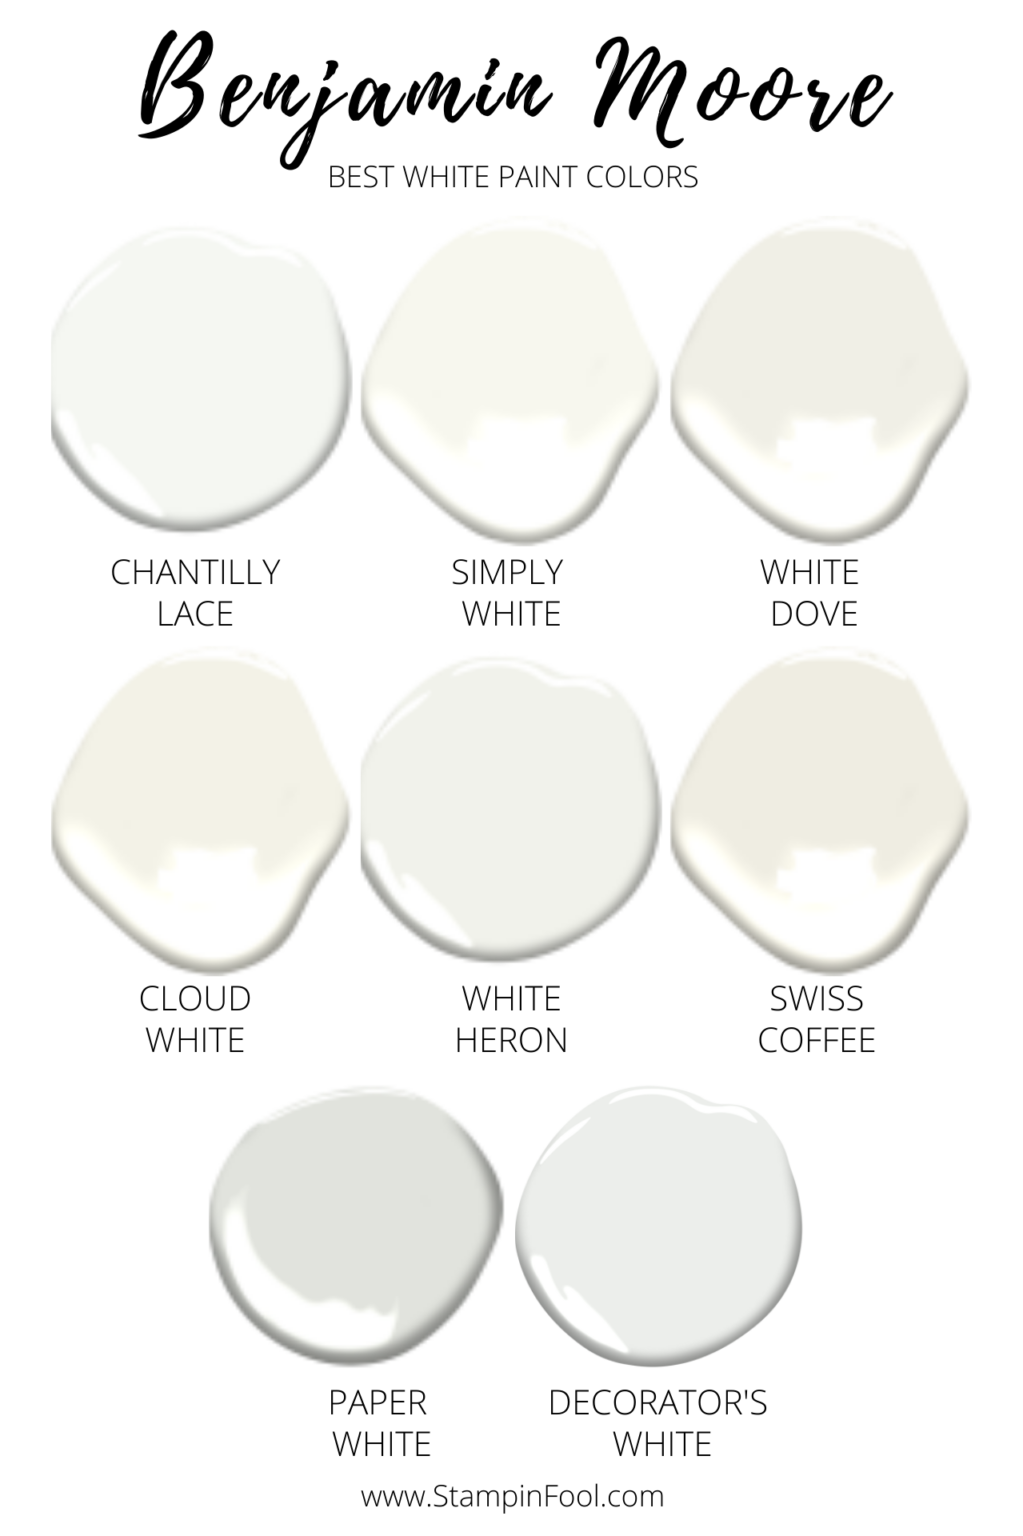 Top 10 benjamin moore white colors ideas and inspiration